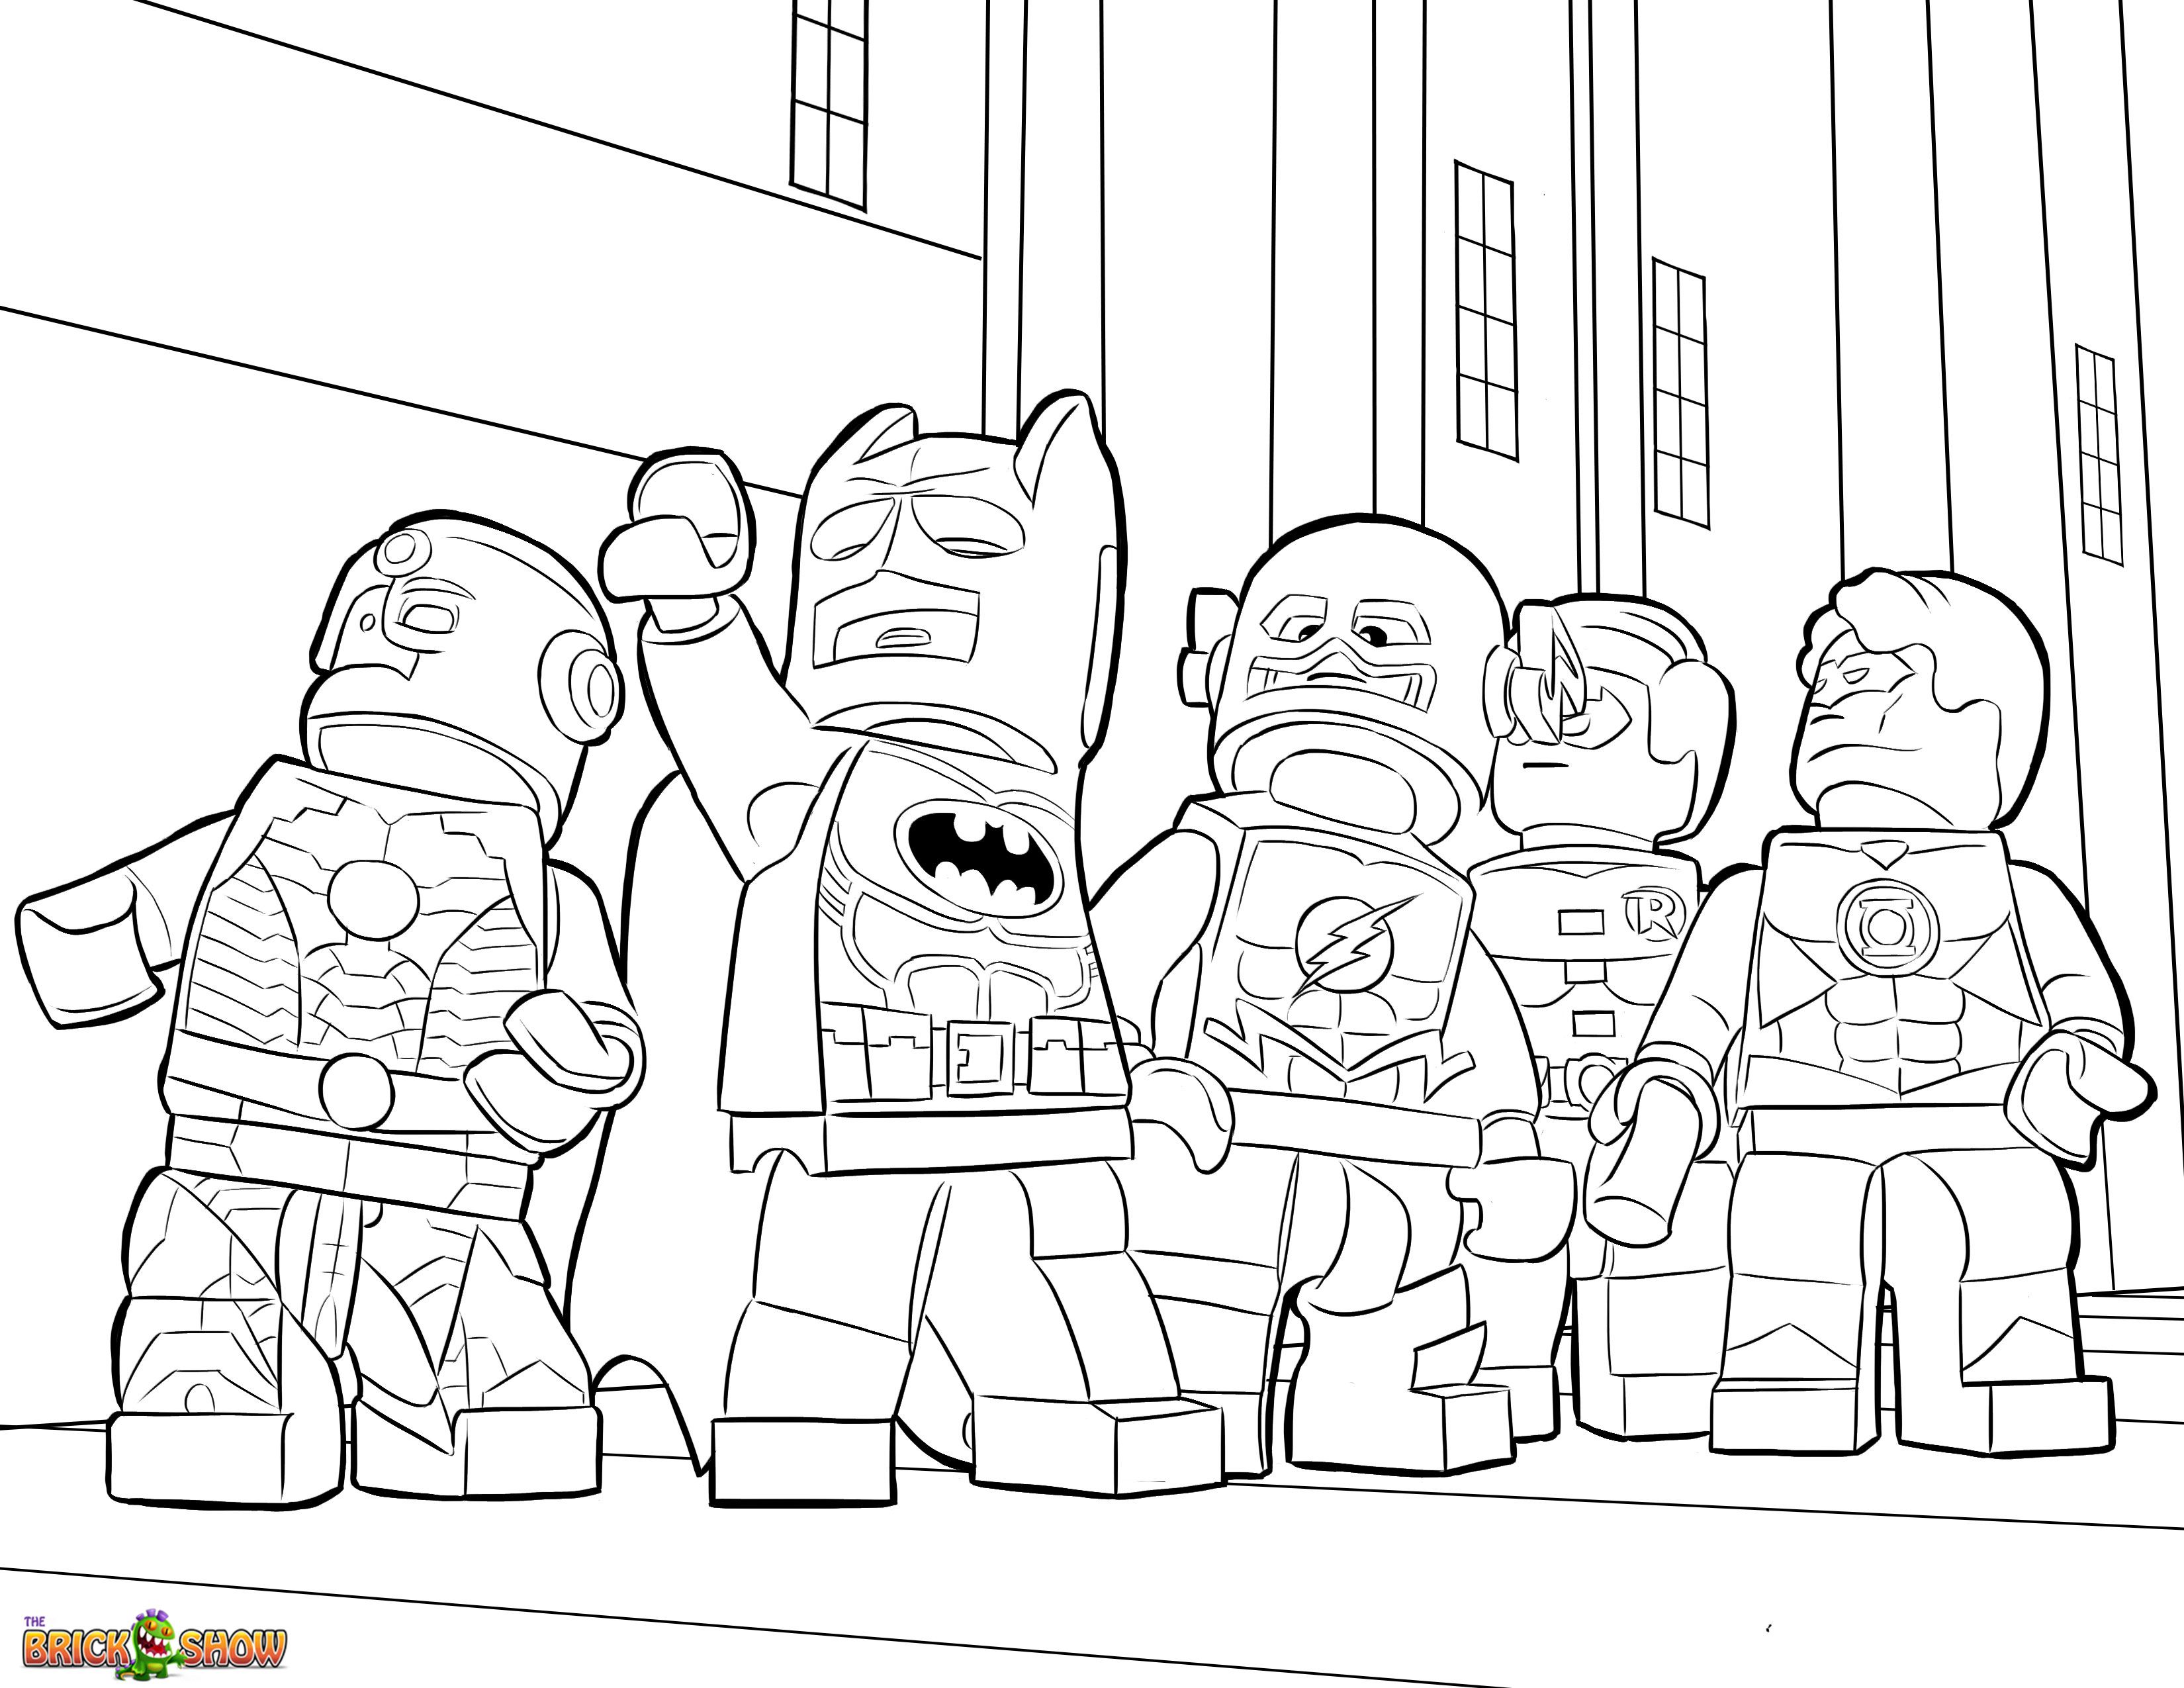 Lego Avengers | Free Coloring Pages on Masivy World